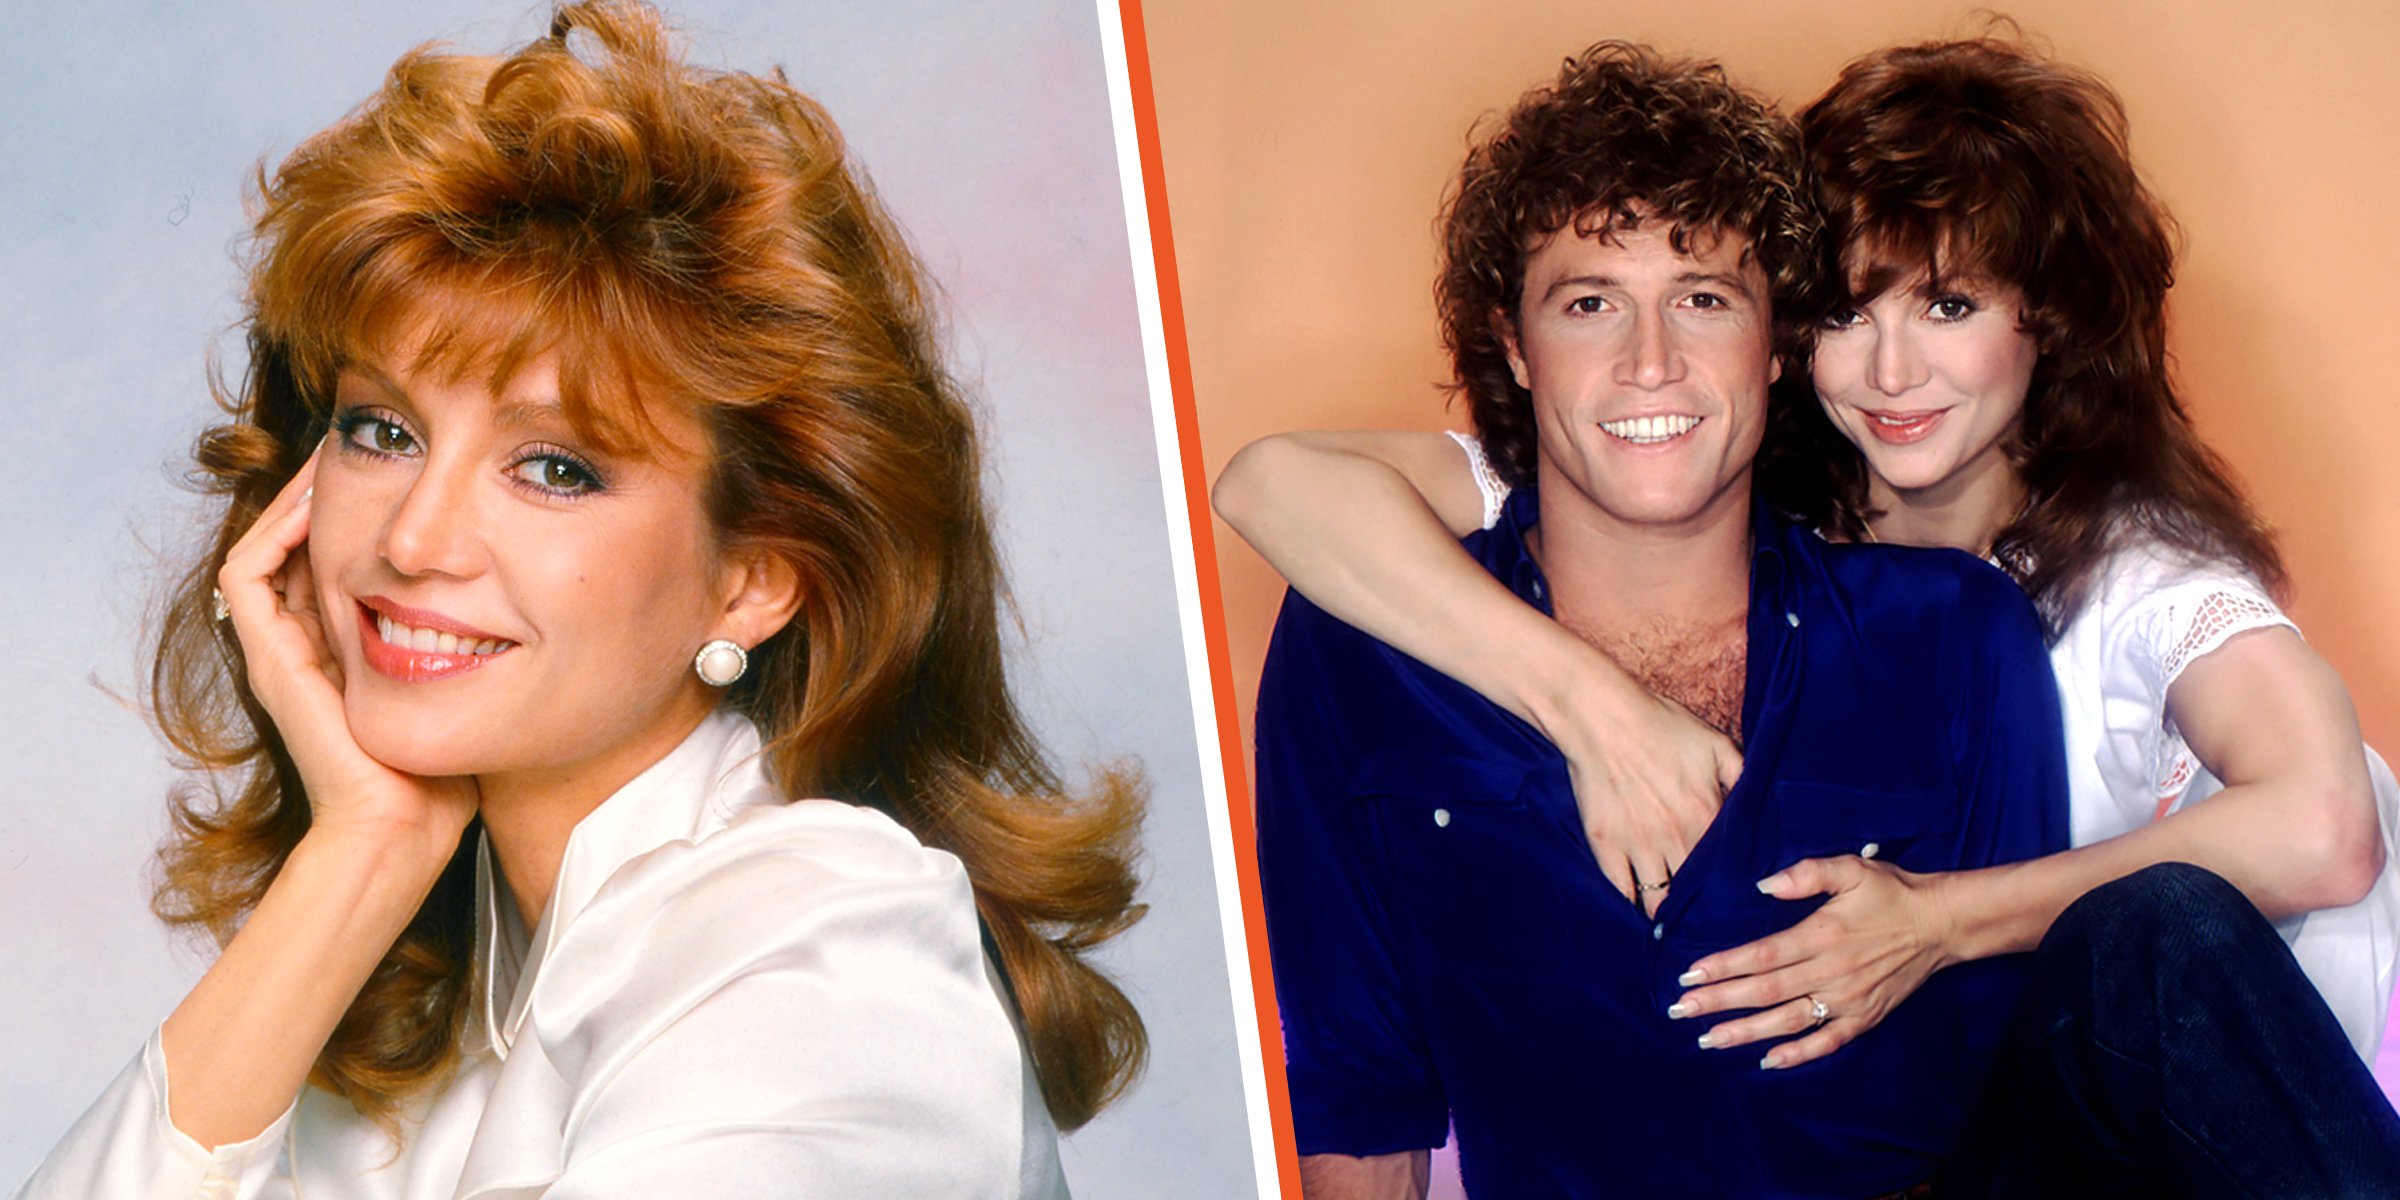 Victoria principal dumped young andy gibb who blamed his fall from fame on their affair â he later died at